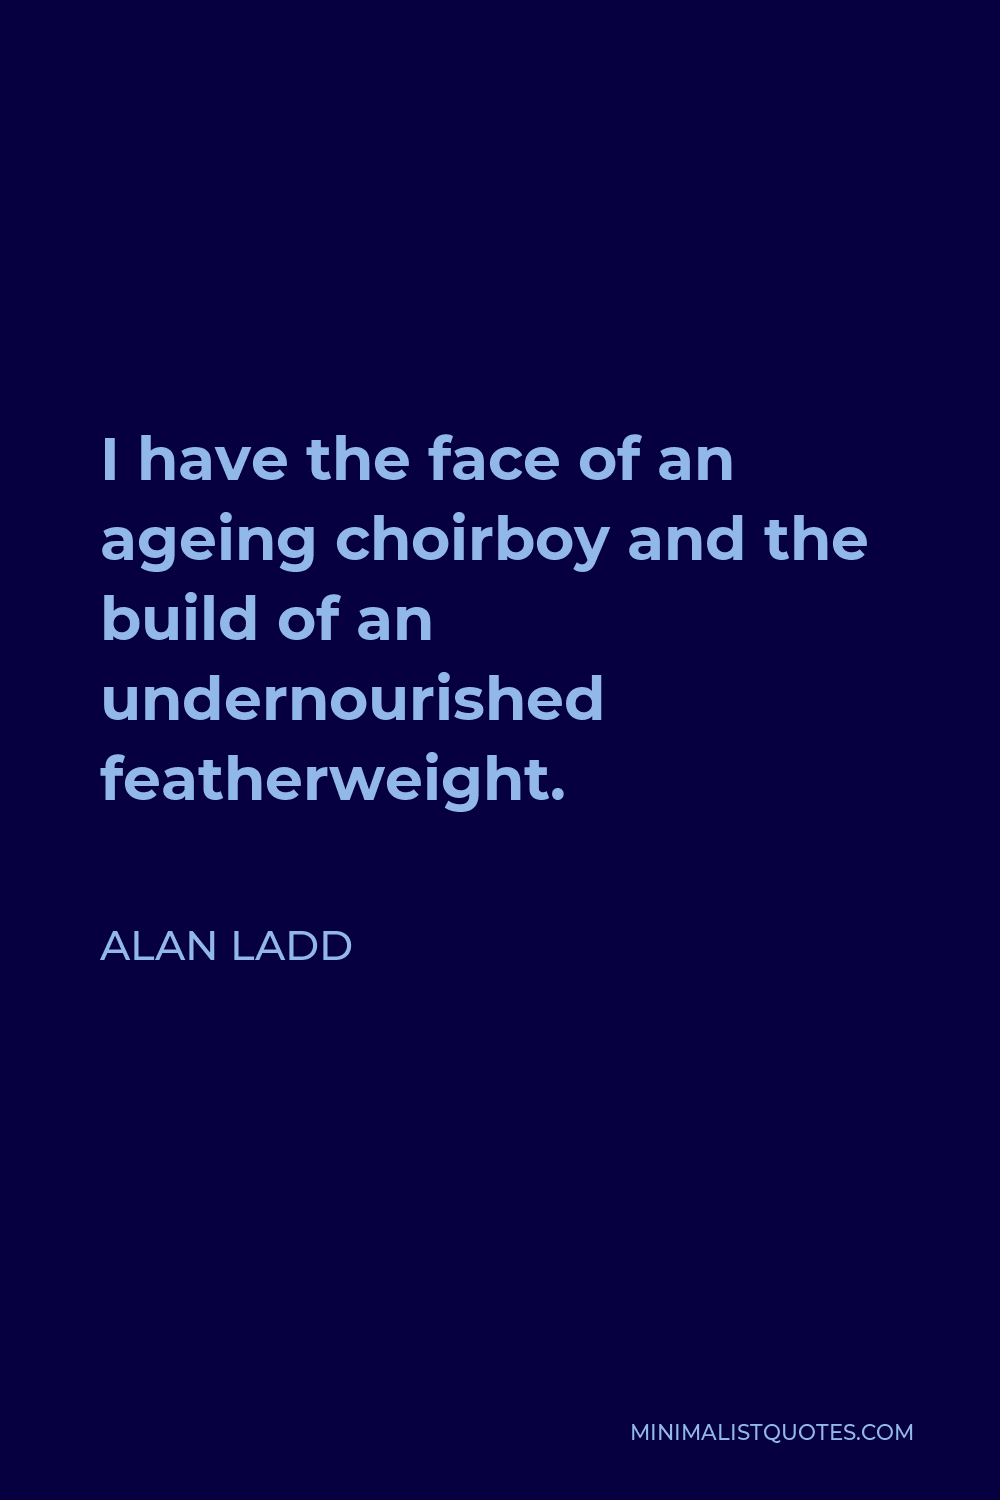 Alan Ladd Quote - I have the face of an ageing choirboy and the build of an undernourished featherweight.